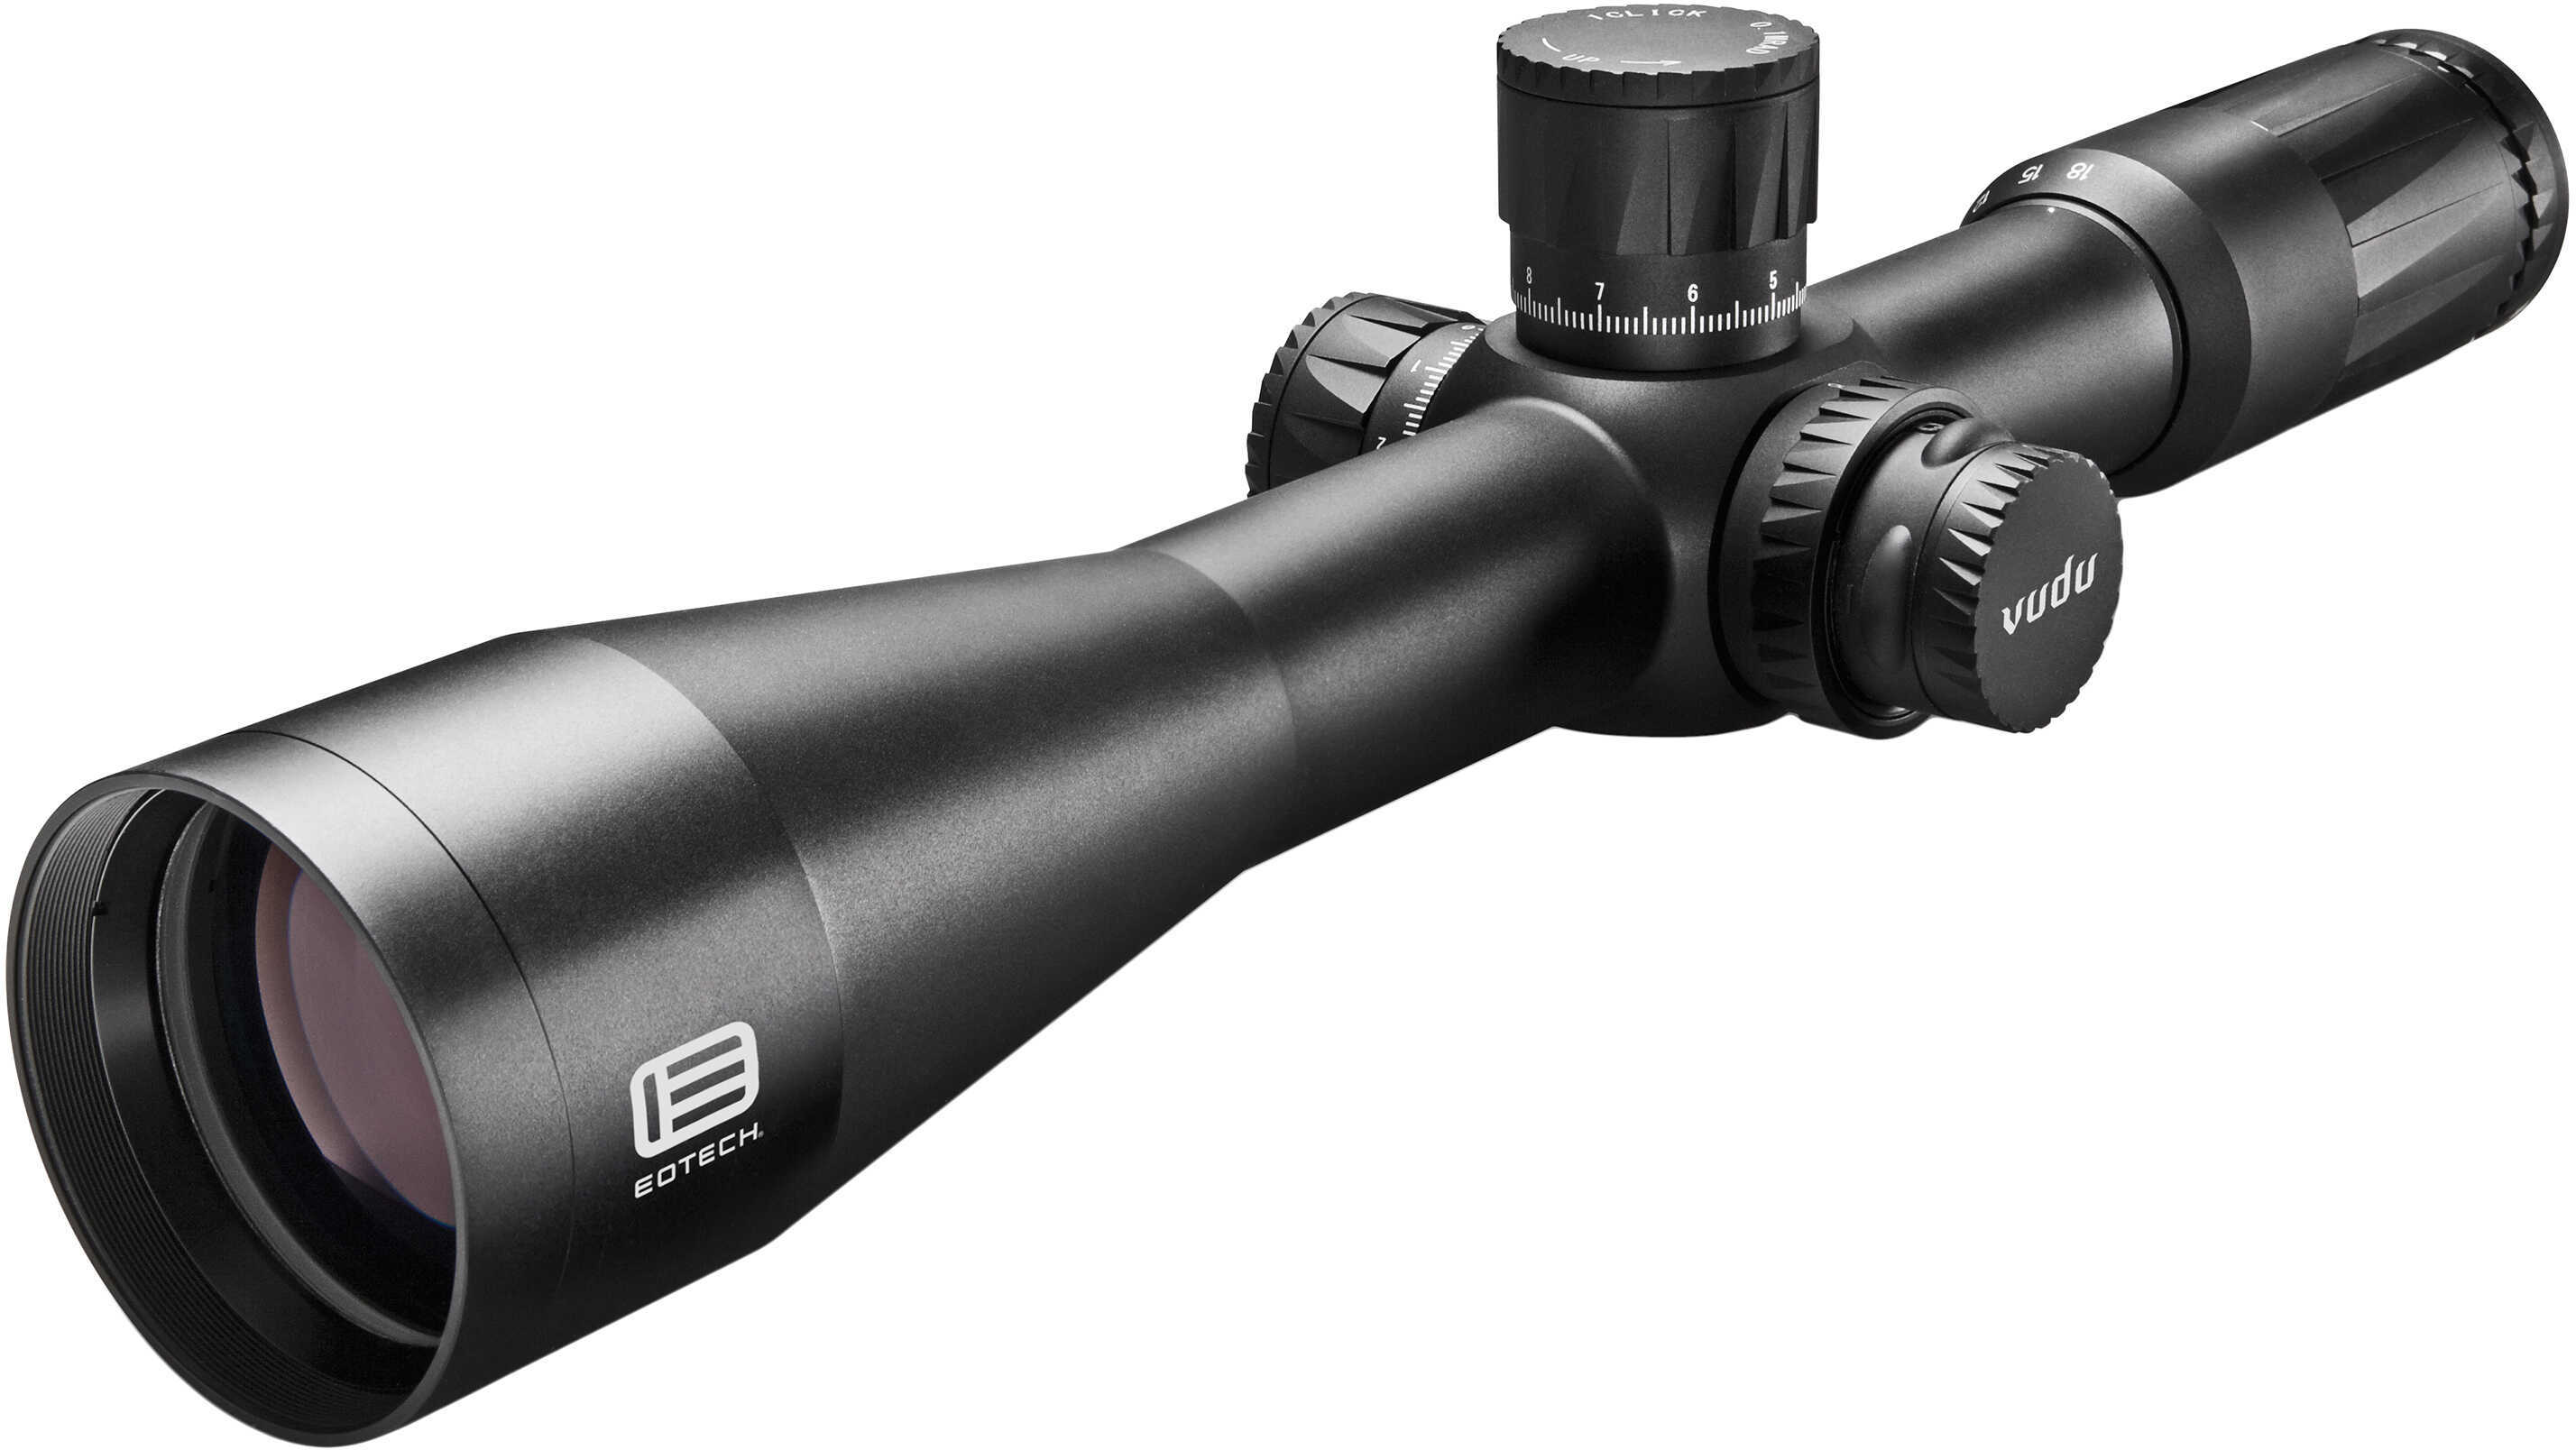 EOTech Vudu Rifle Scope 3.5-18X50mm 34mm MD2-MOA Illuminated Reticle .25 MOA or .1 MIL Adjustments First Focal Plane Bla